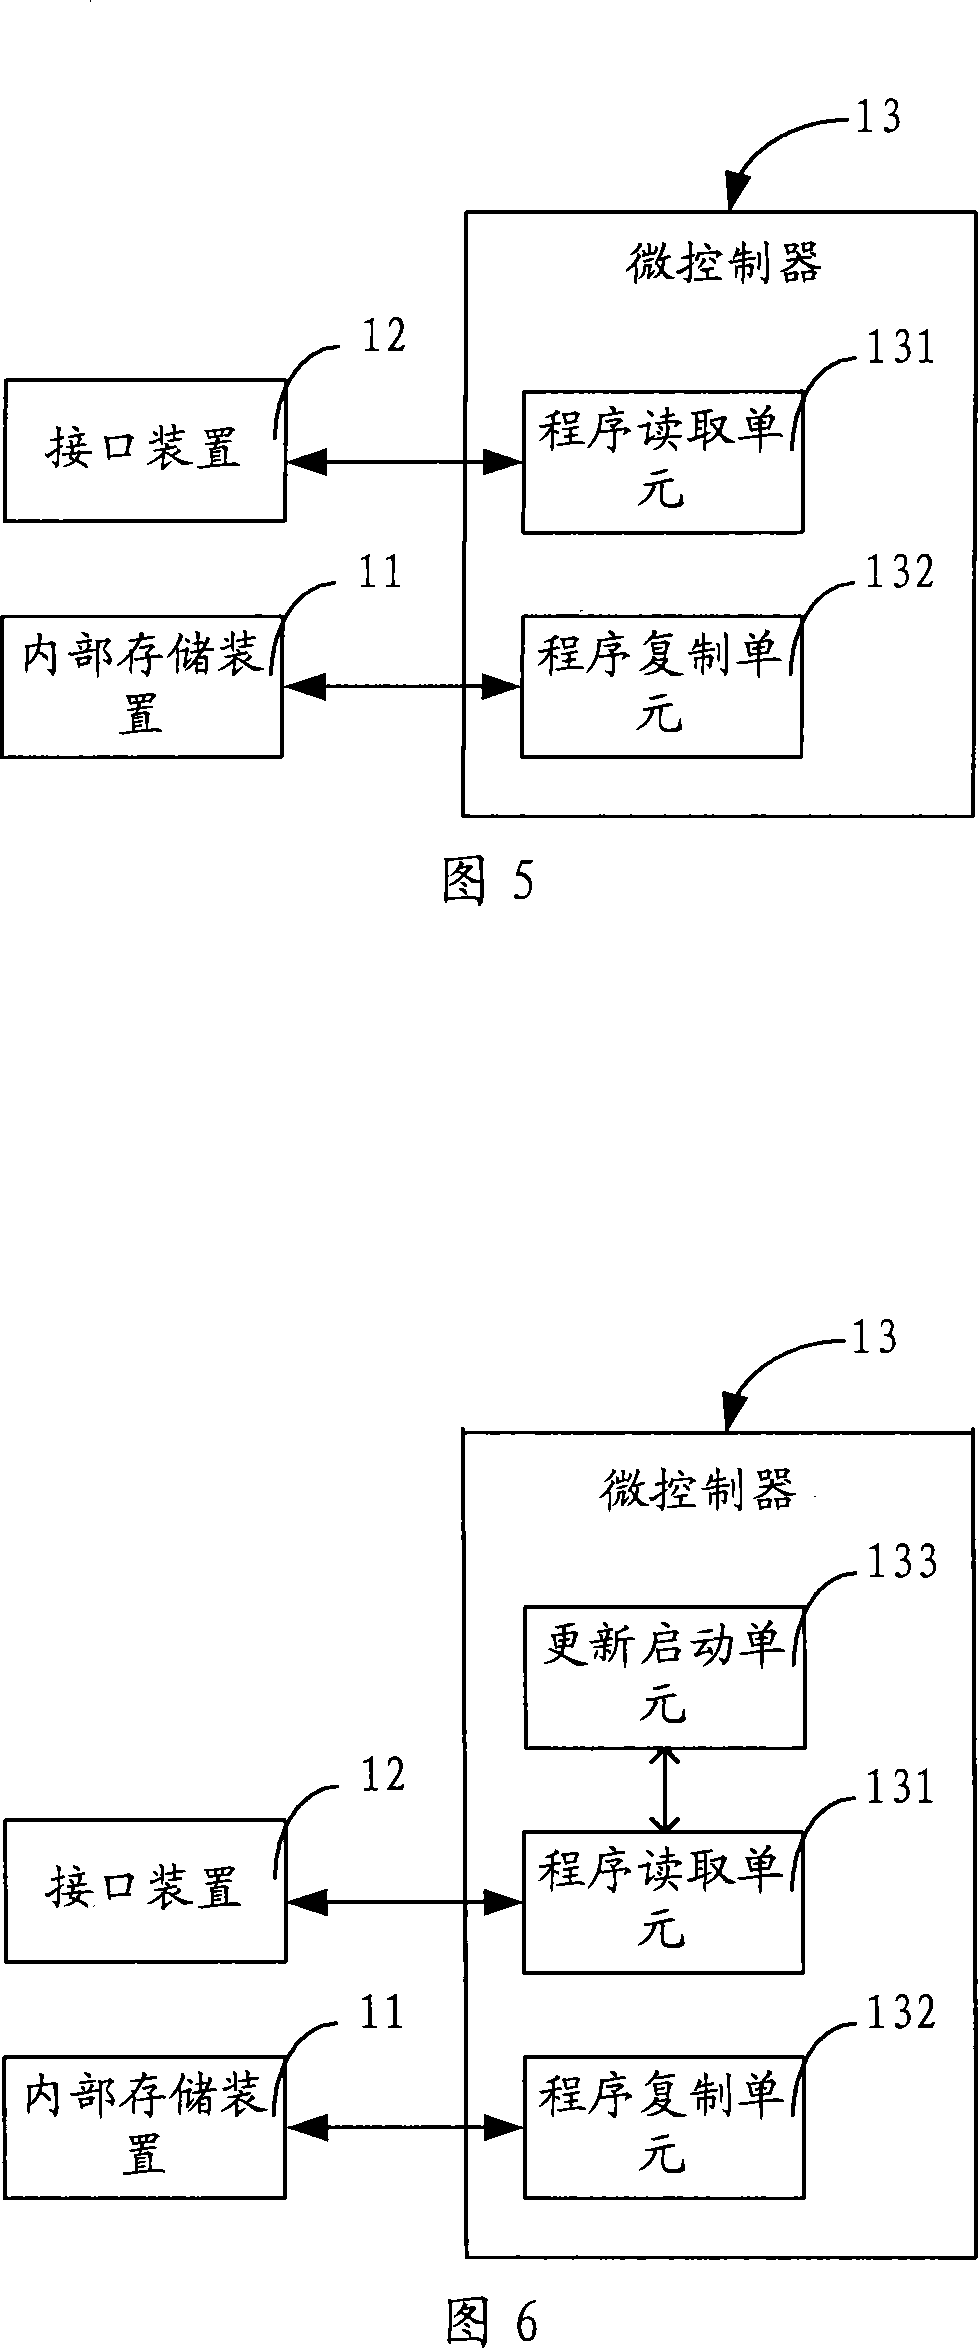 Embedded type system and method for renewing application program